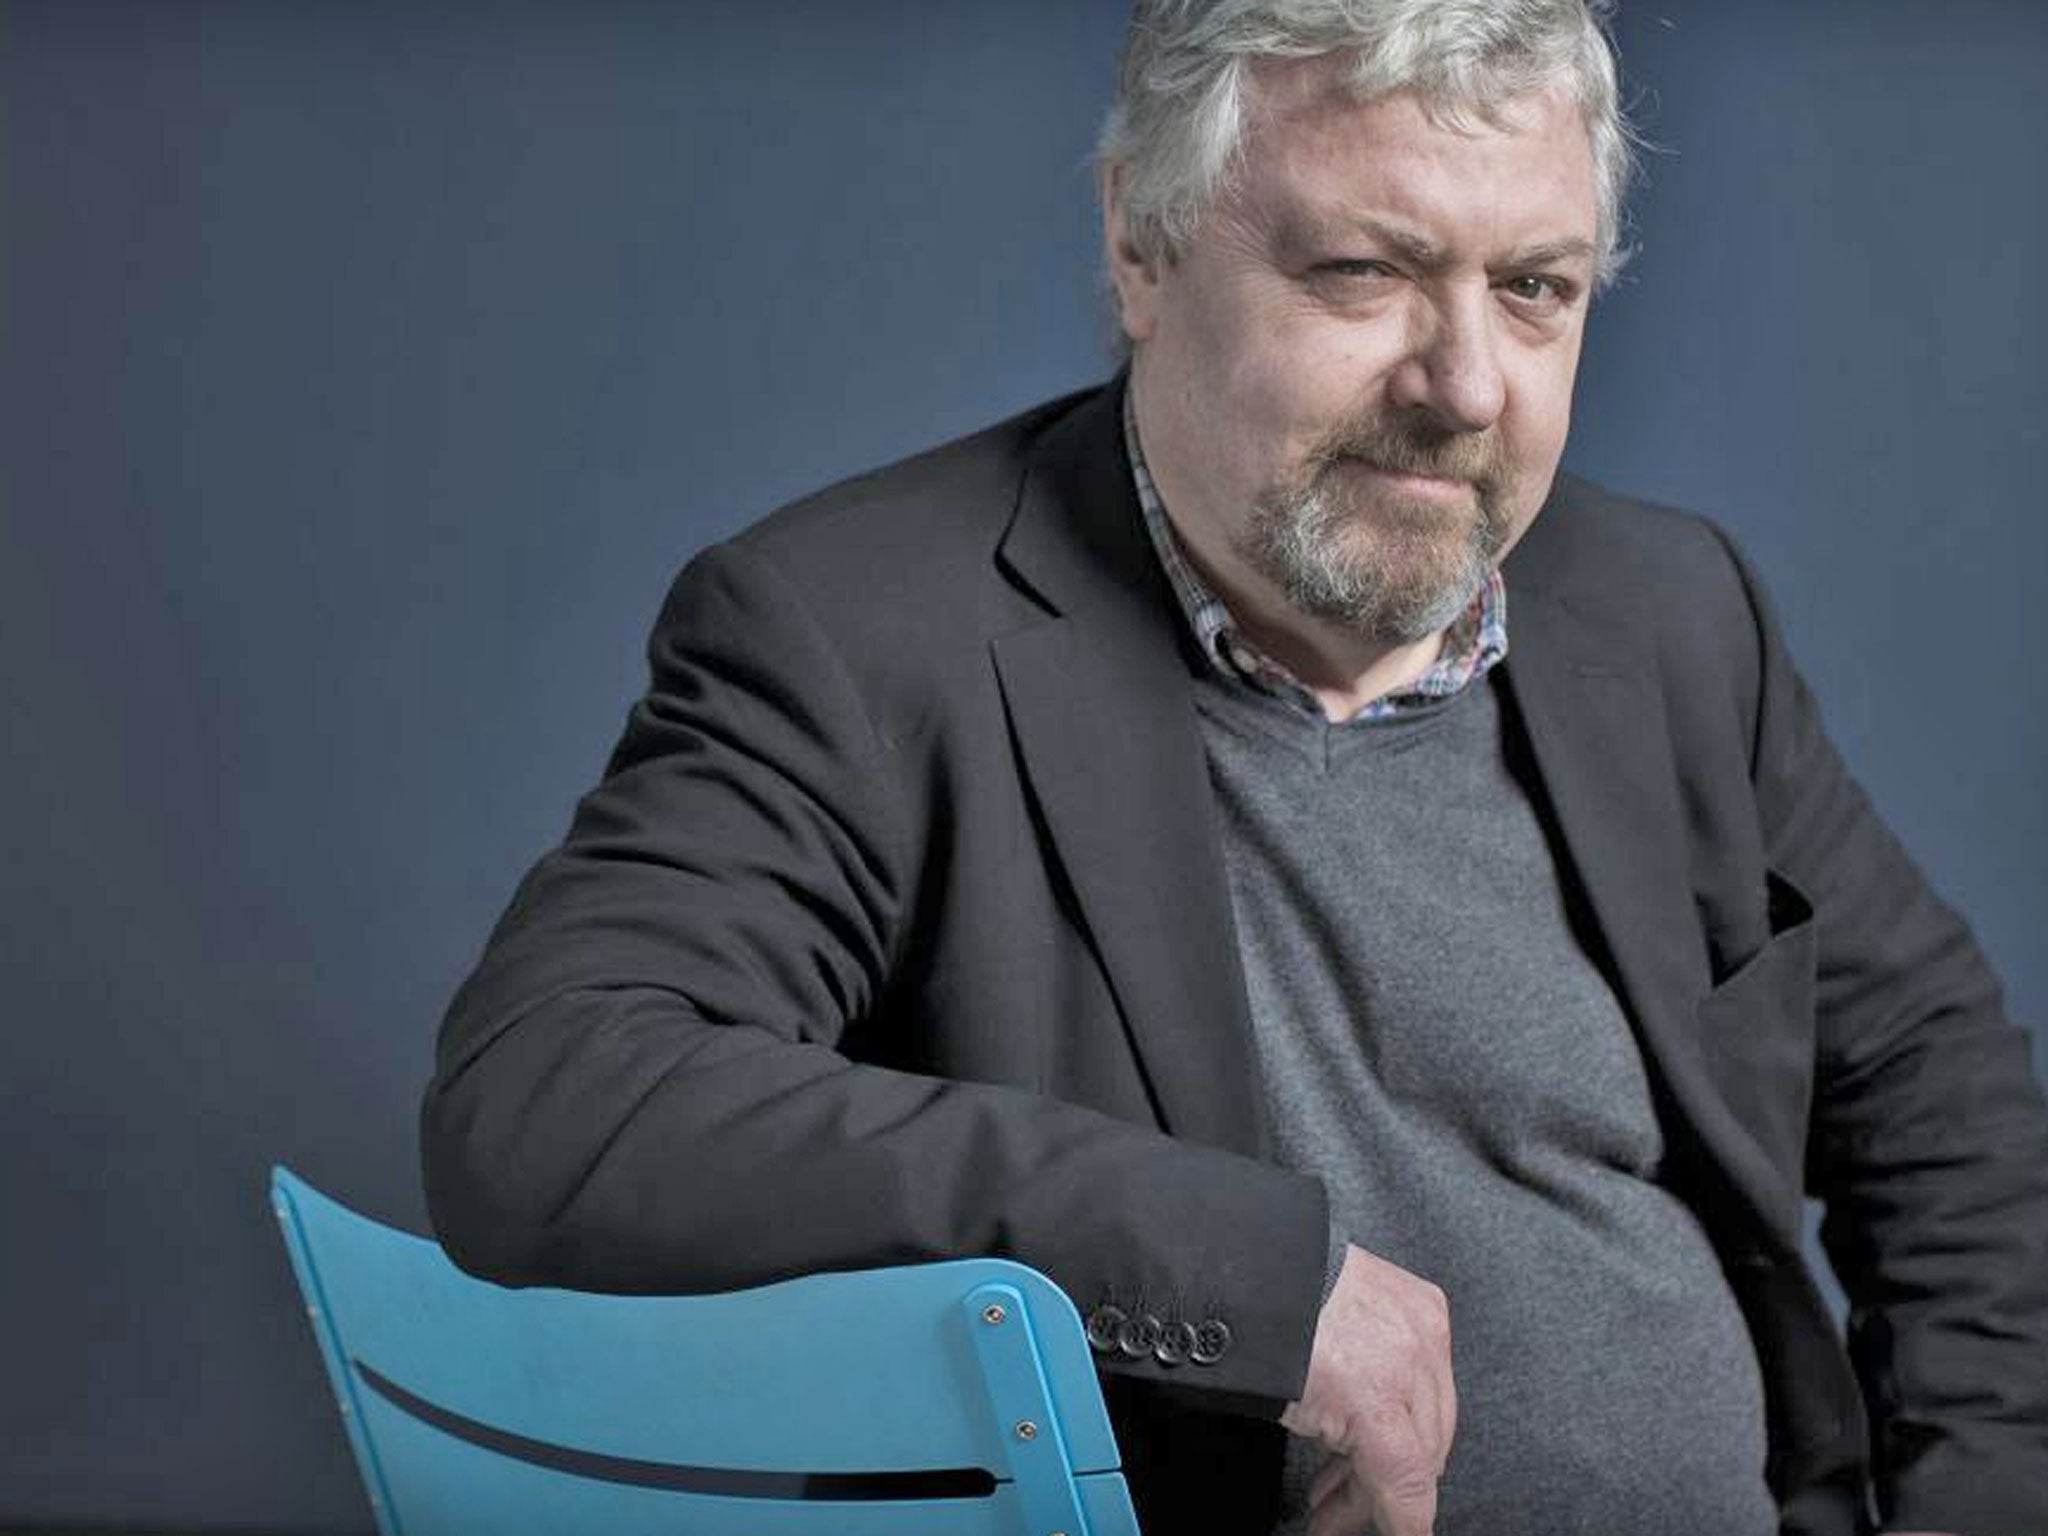 ‘The United States of Europe is madness’, John Sessions says